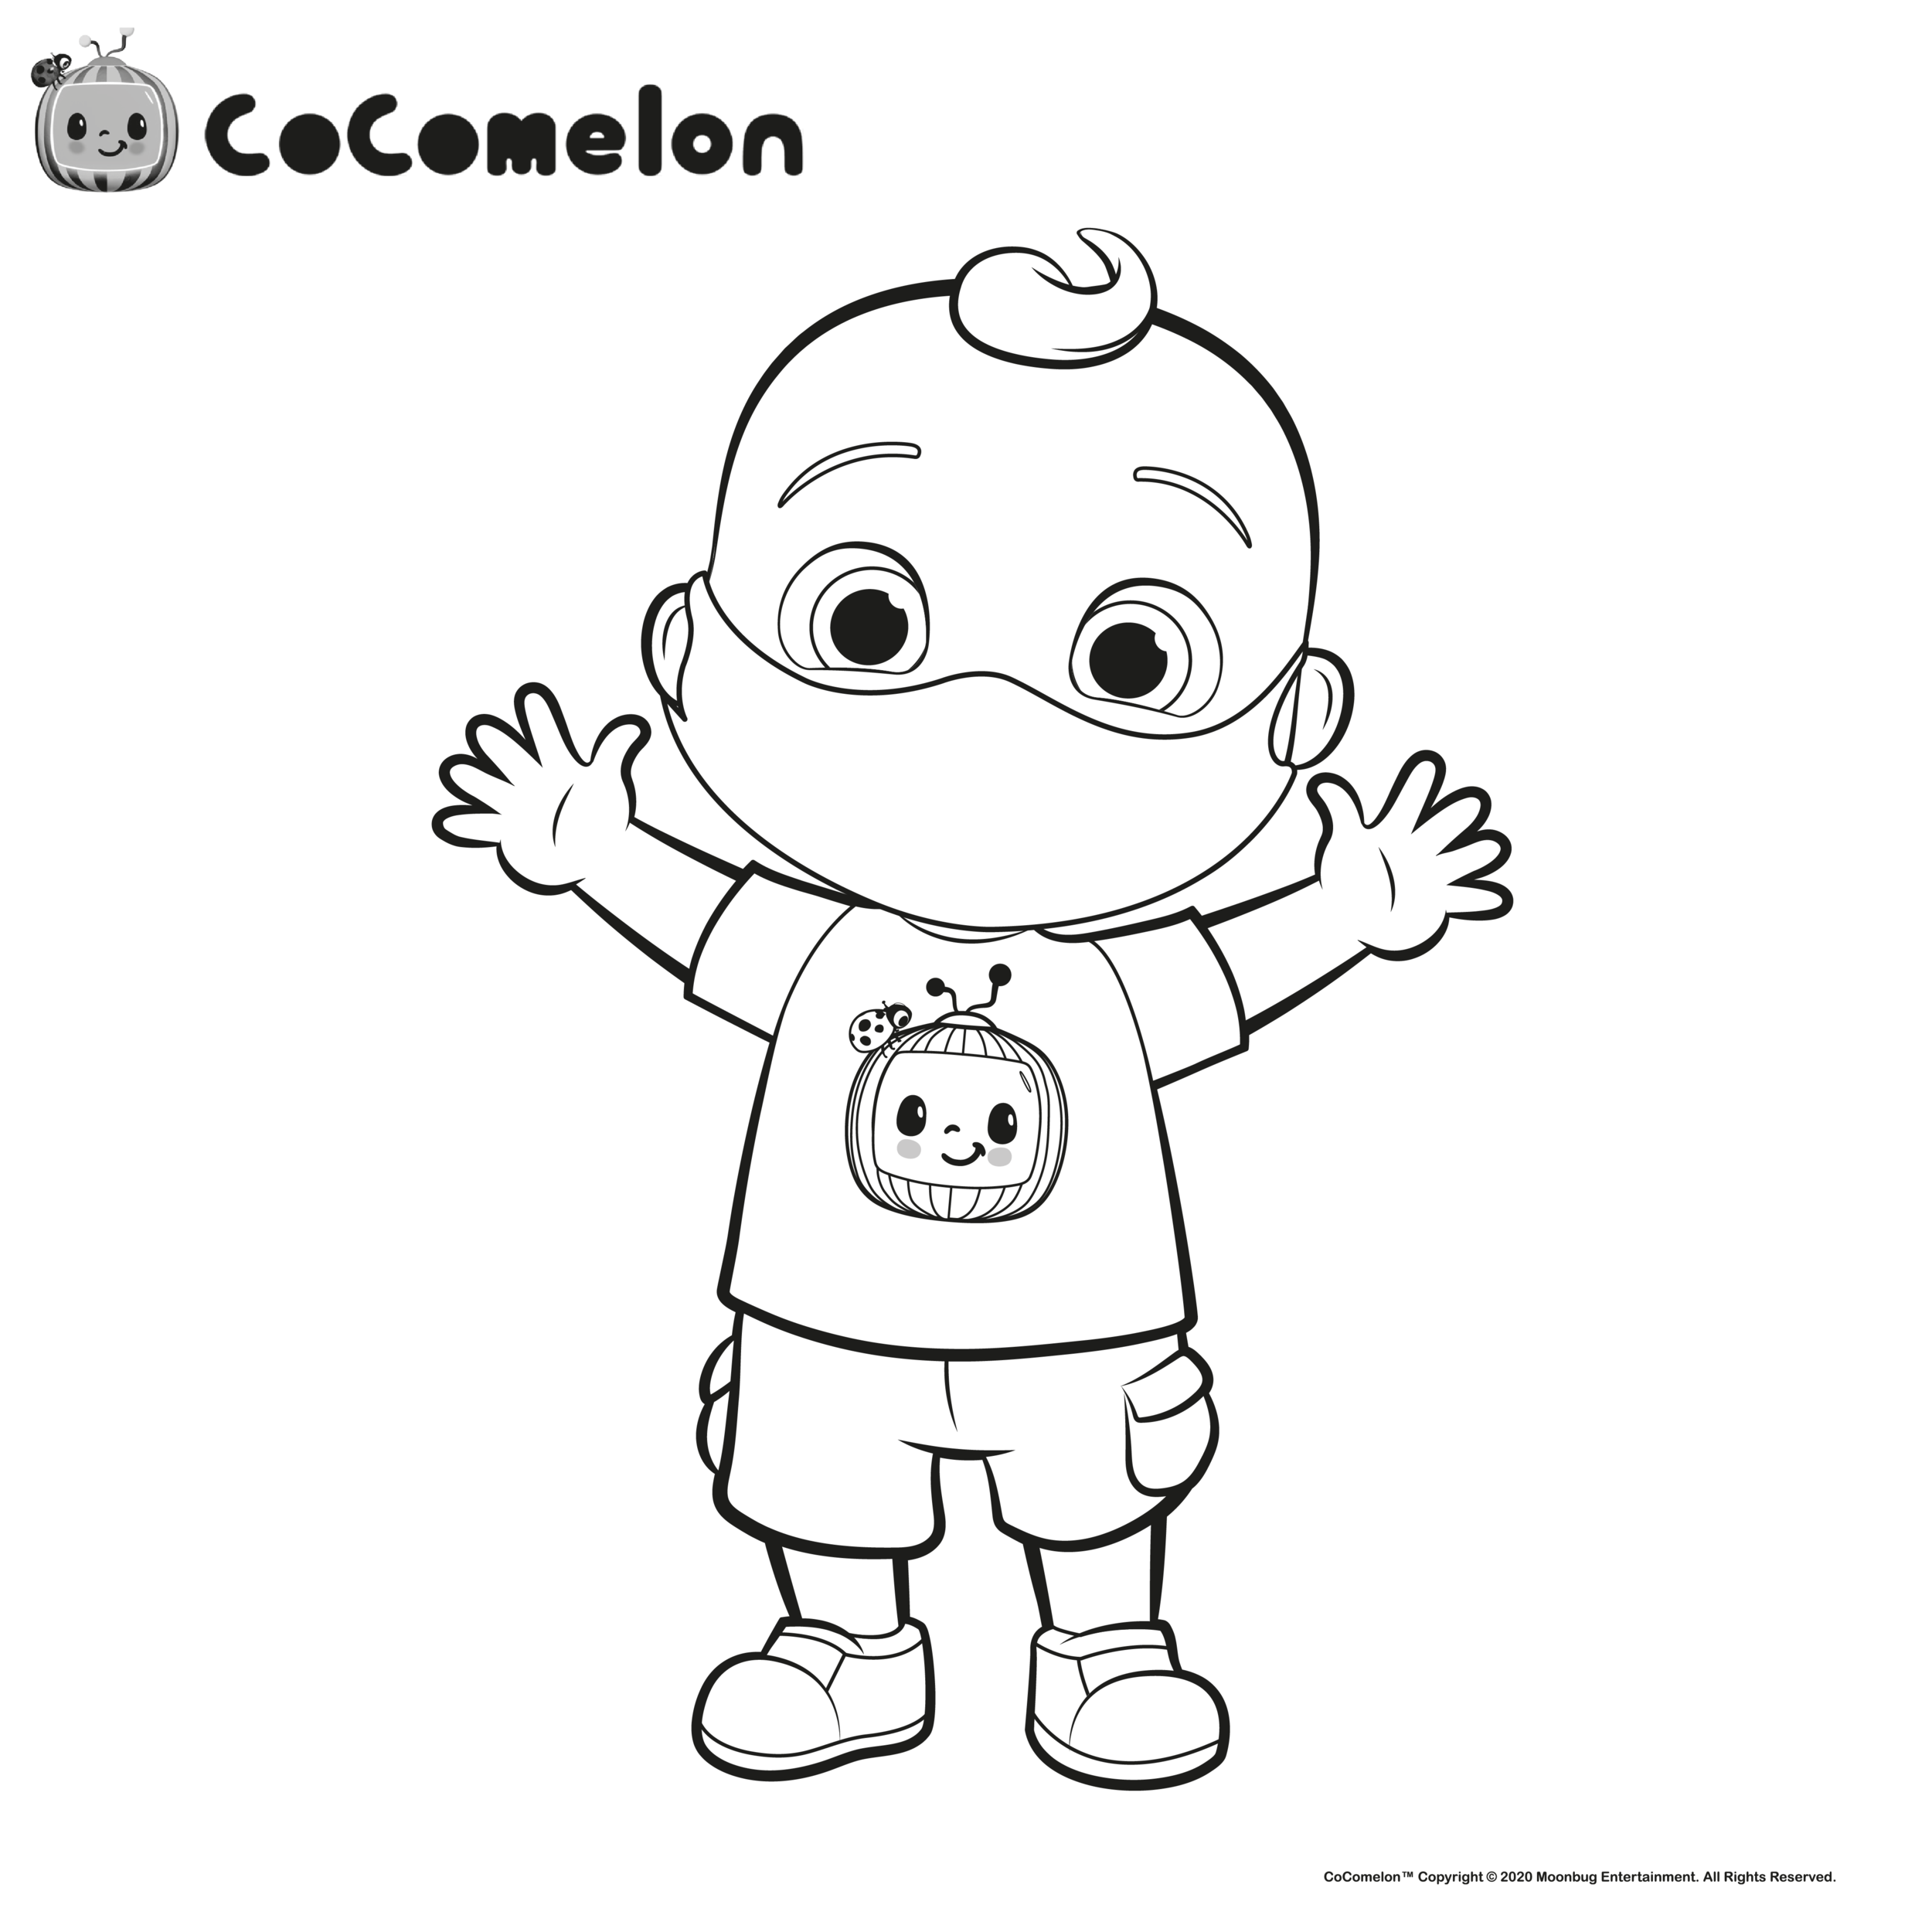 Other Coloring Pages — cocomelon.com